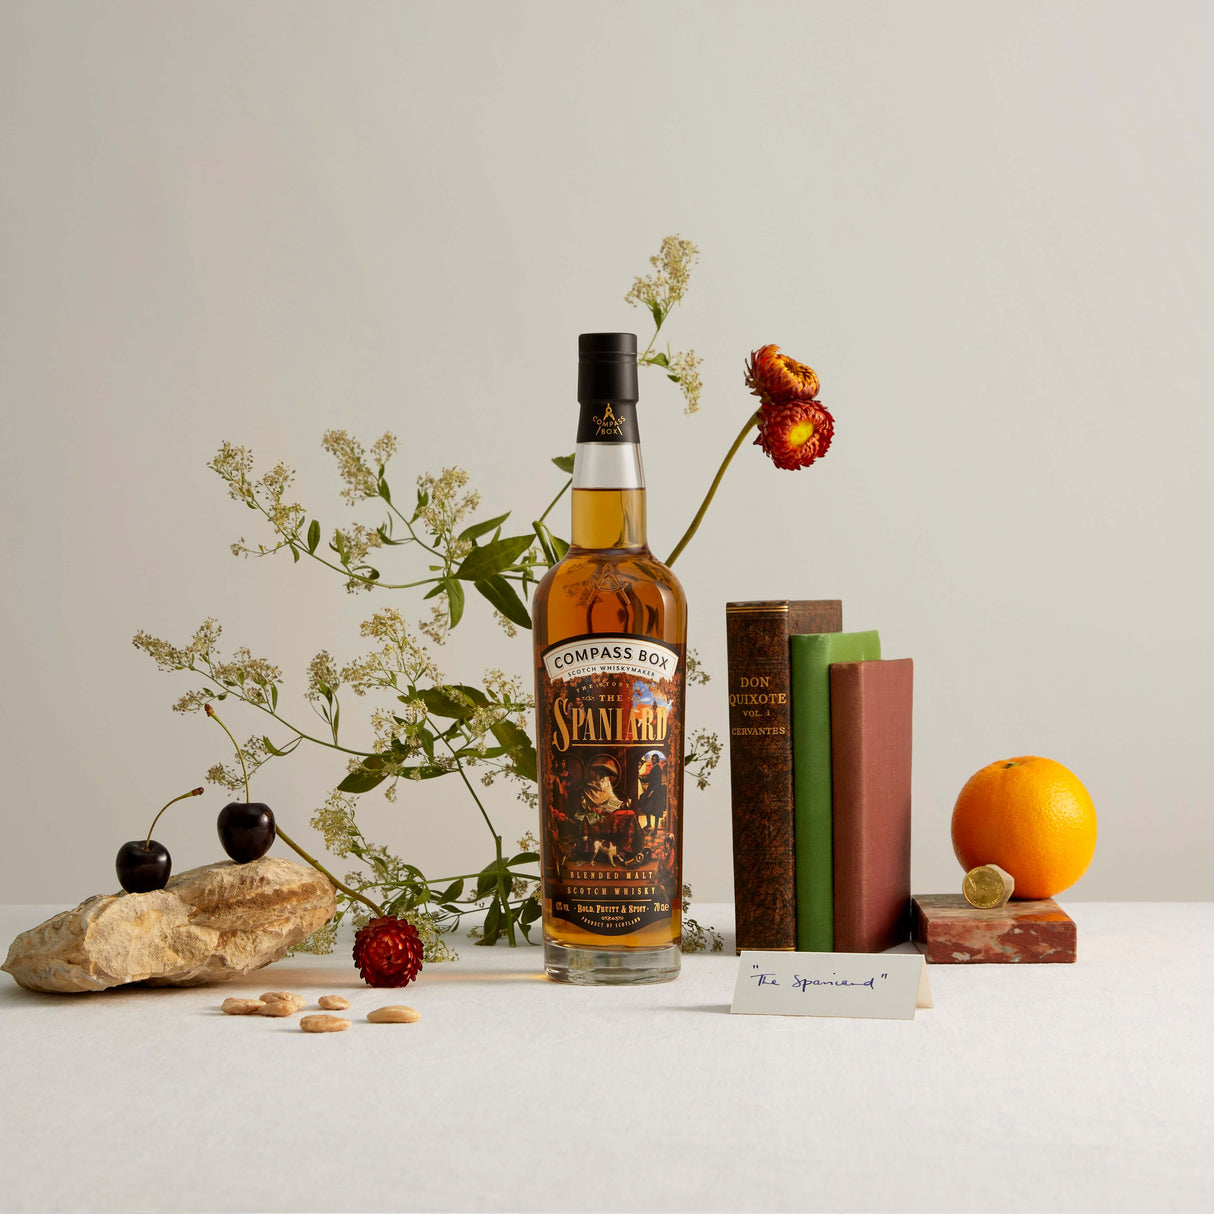 Compass Box The Story of the Spaniard Mood Shot